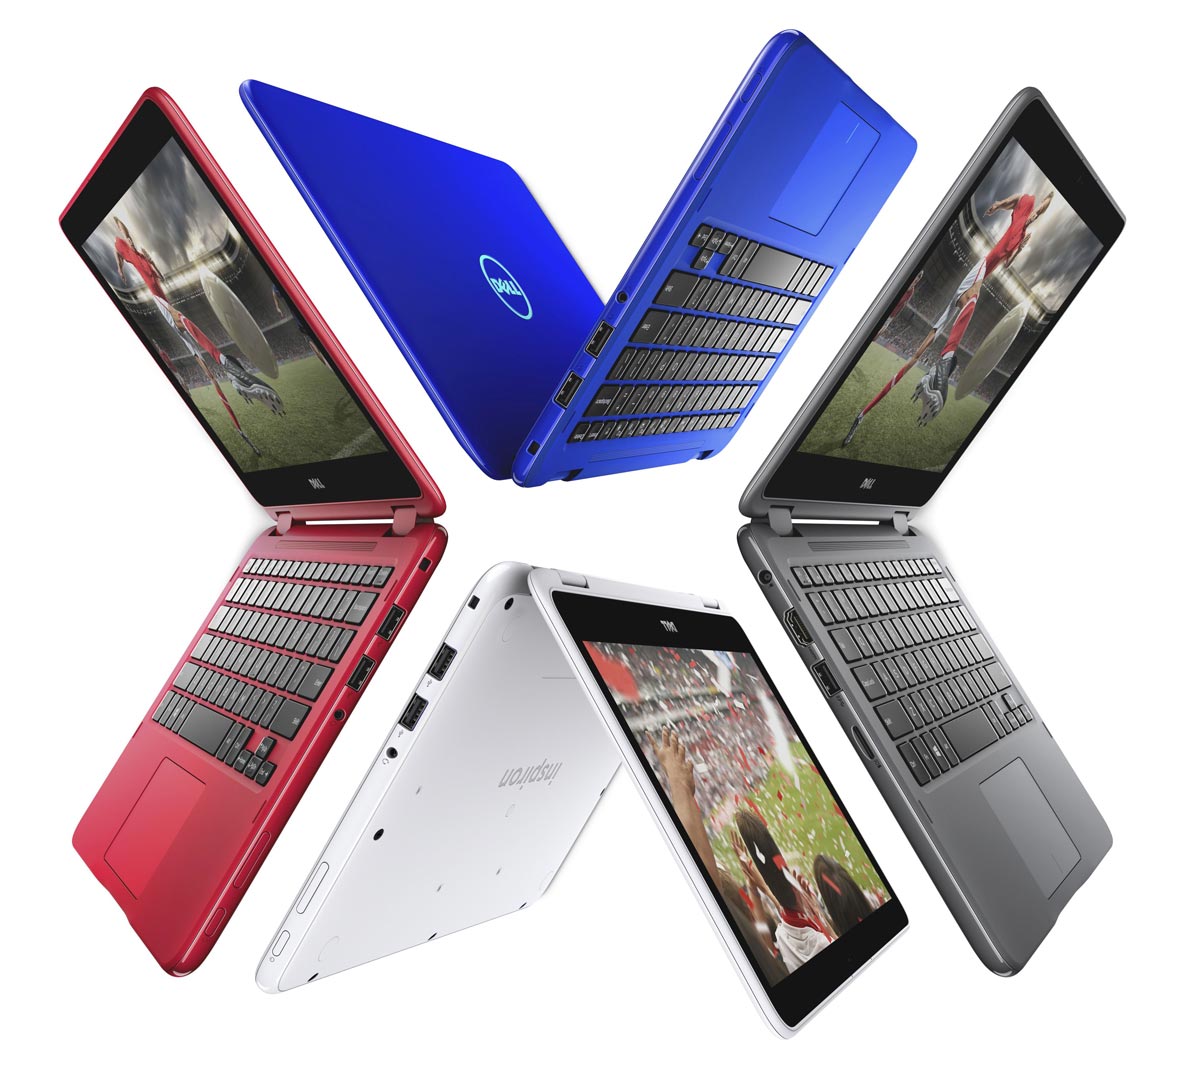 Inspiron-11-3000-2-in-1